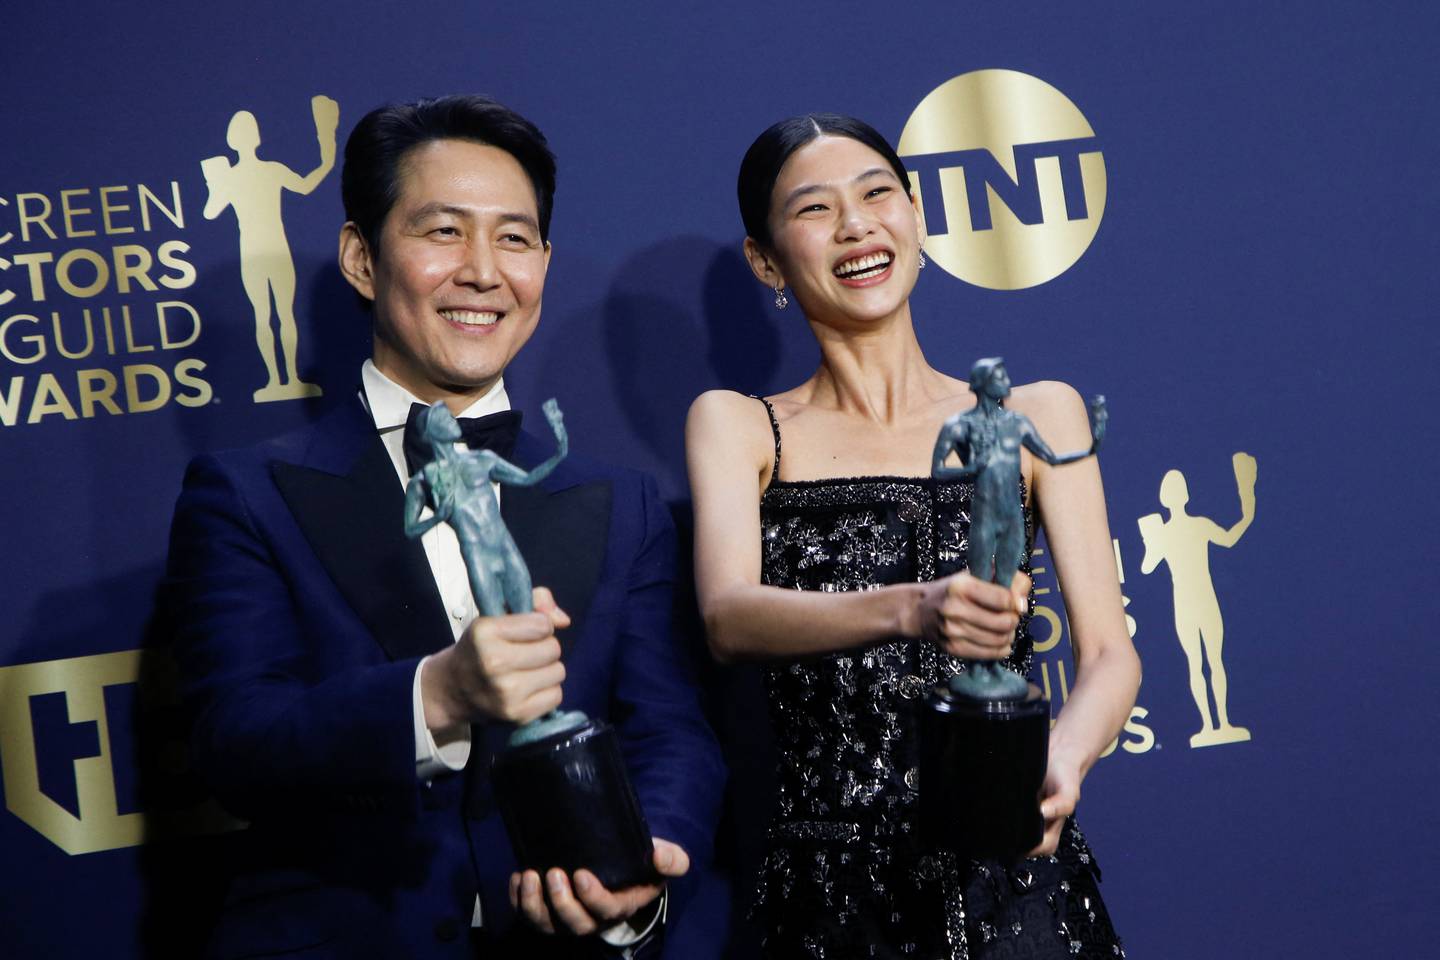 Actors Lee Jung-jae and Jung Ho-yeon backstage with their awards for Outstanding Performance by a Male Actor and Female Actor in a Drama Series at the 28th Screen Actors Guild Awards. Reuters